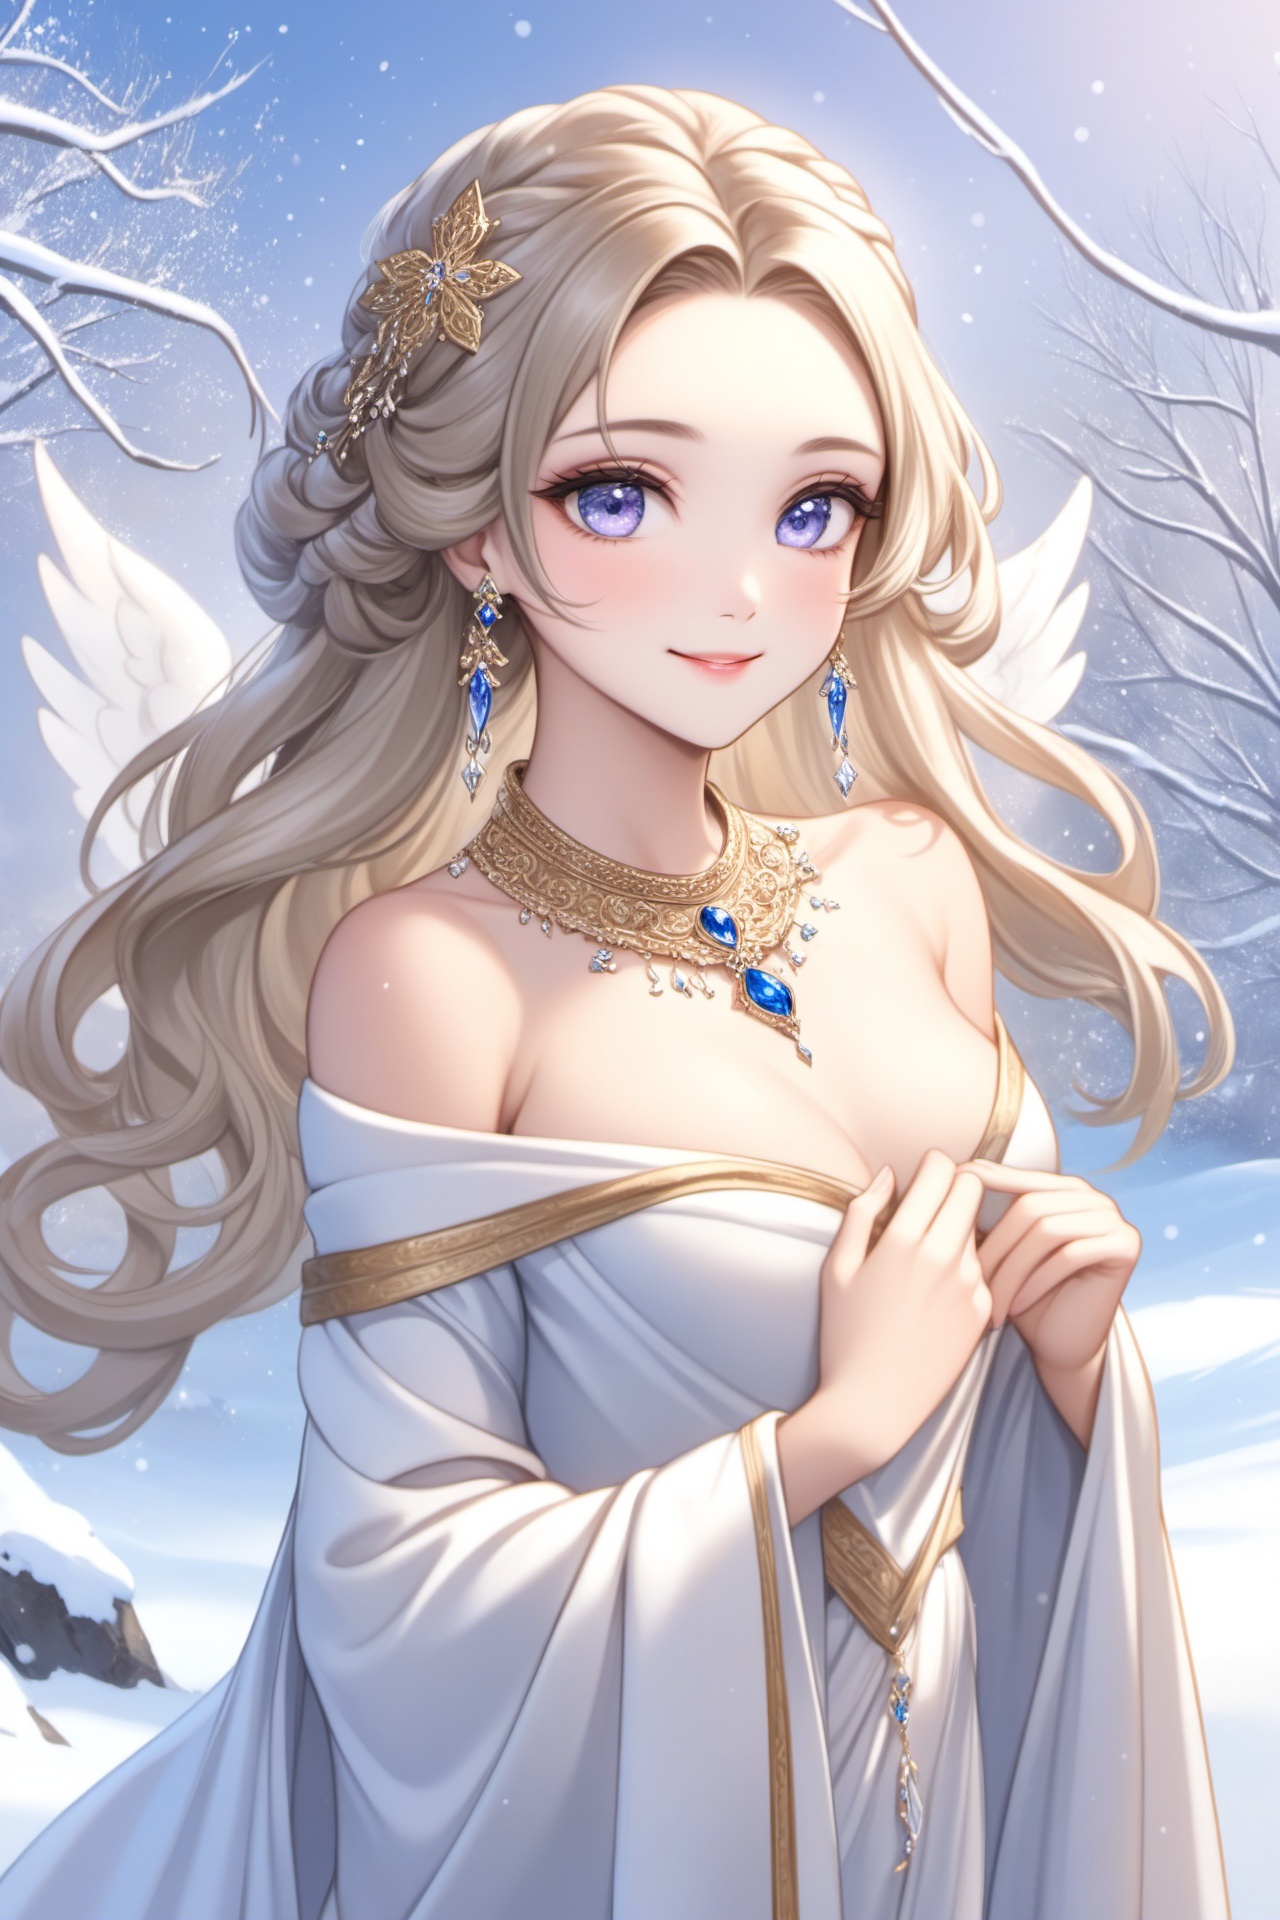 a woman of ancient style,winter scene,luxurious,captivating gaze,flawless complexion,cascading locks of silk,enchanting smile,expressive eyes that sparkle,angelic features,graceful neck,elegant posture,fashionable attire,